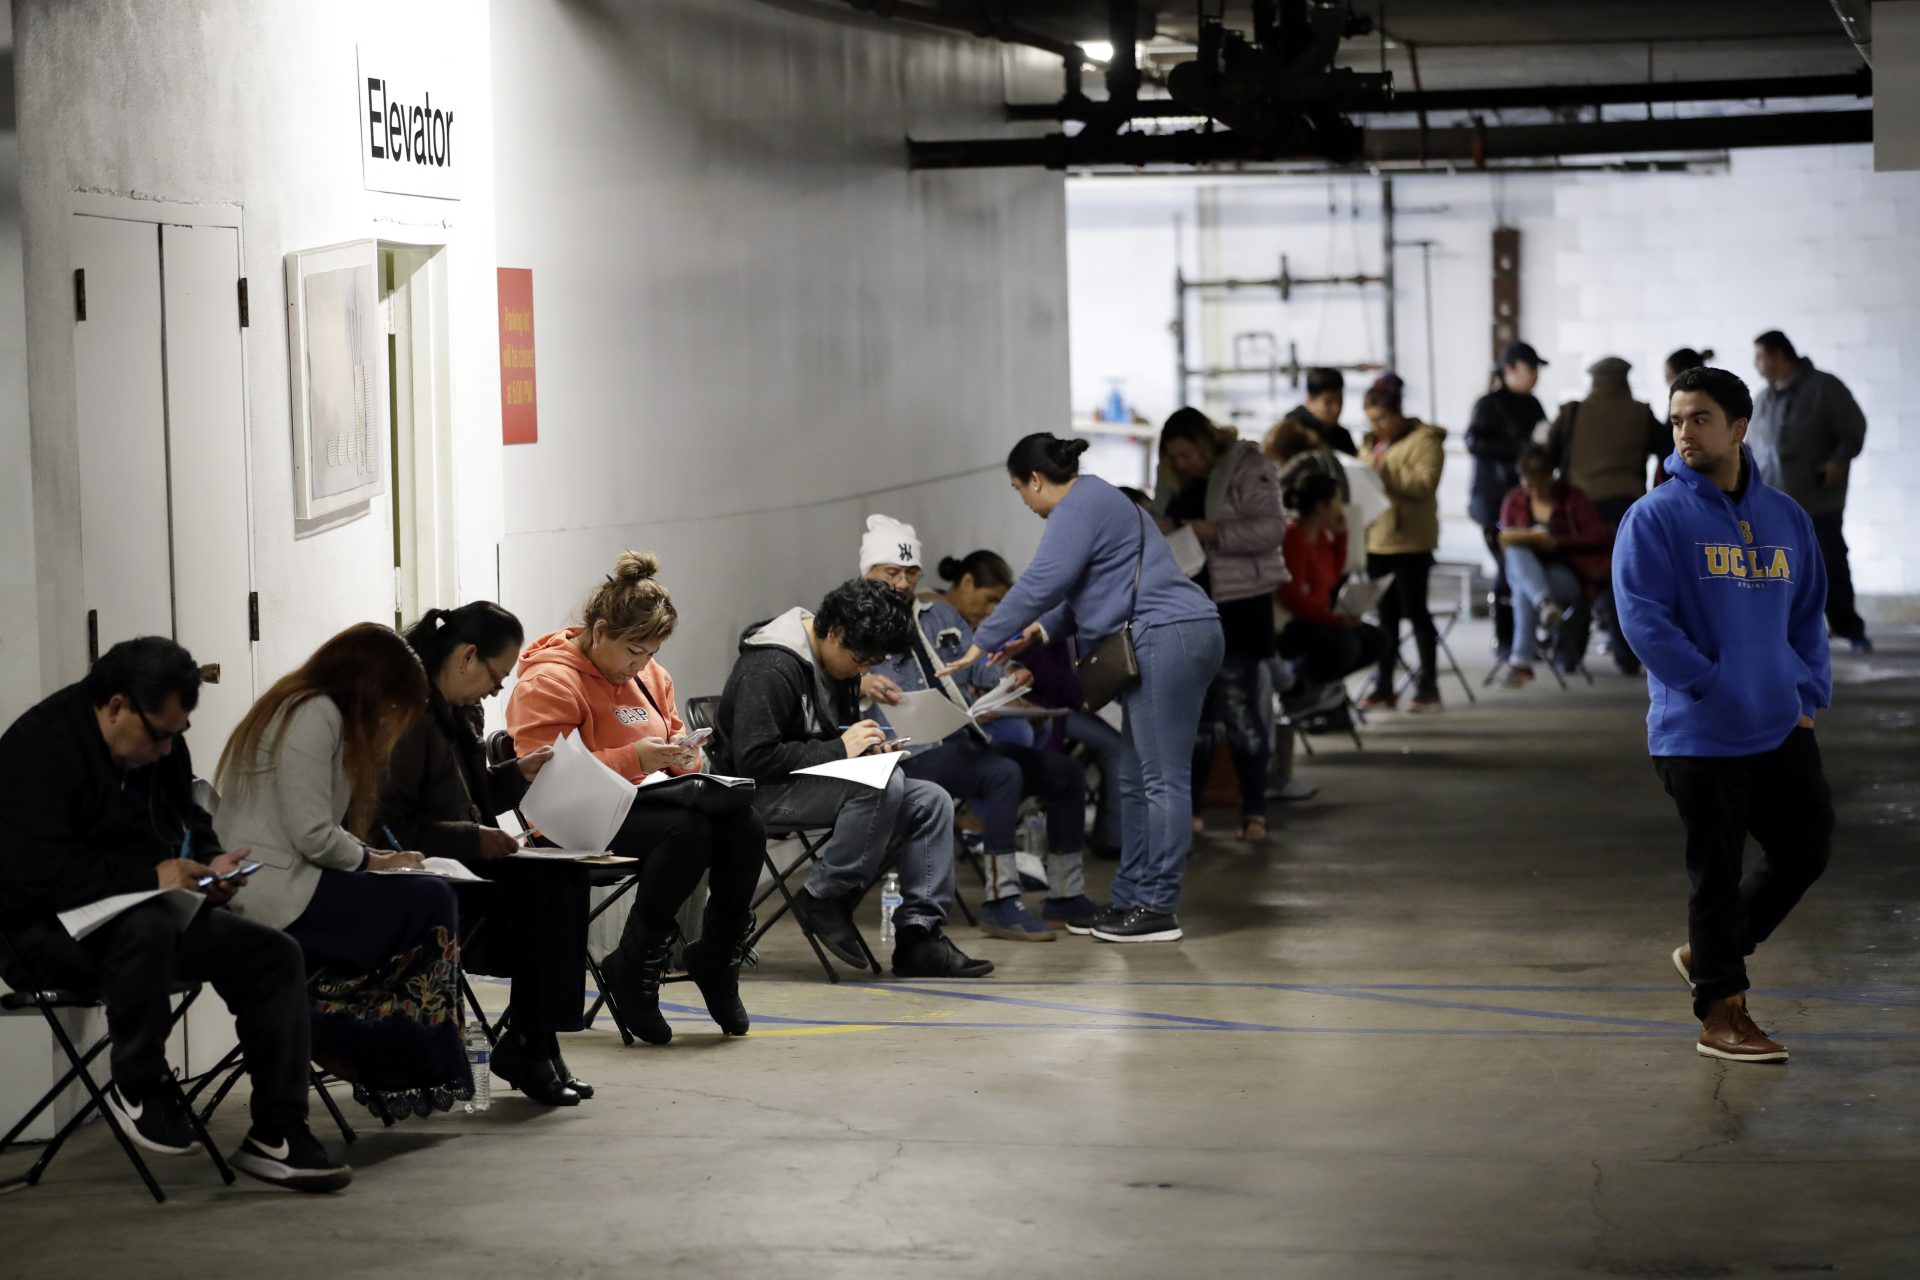 Unionized hospitality workers wait in line in a basement garage to apply for unemployment benefits at the Hospitality Training Academy Friday, March 13, 2020, in Los Angeles. Fearing a widespread health crisis, Californians moved broadly Friday to get in front of the spread of the coronavirus, shuttering schools that educate hundreds of thousands of students, urging the faithful to watch religious services online and postponing or scratching just about any event that could attract a big crowd.